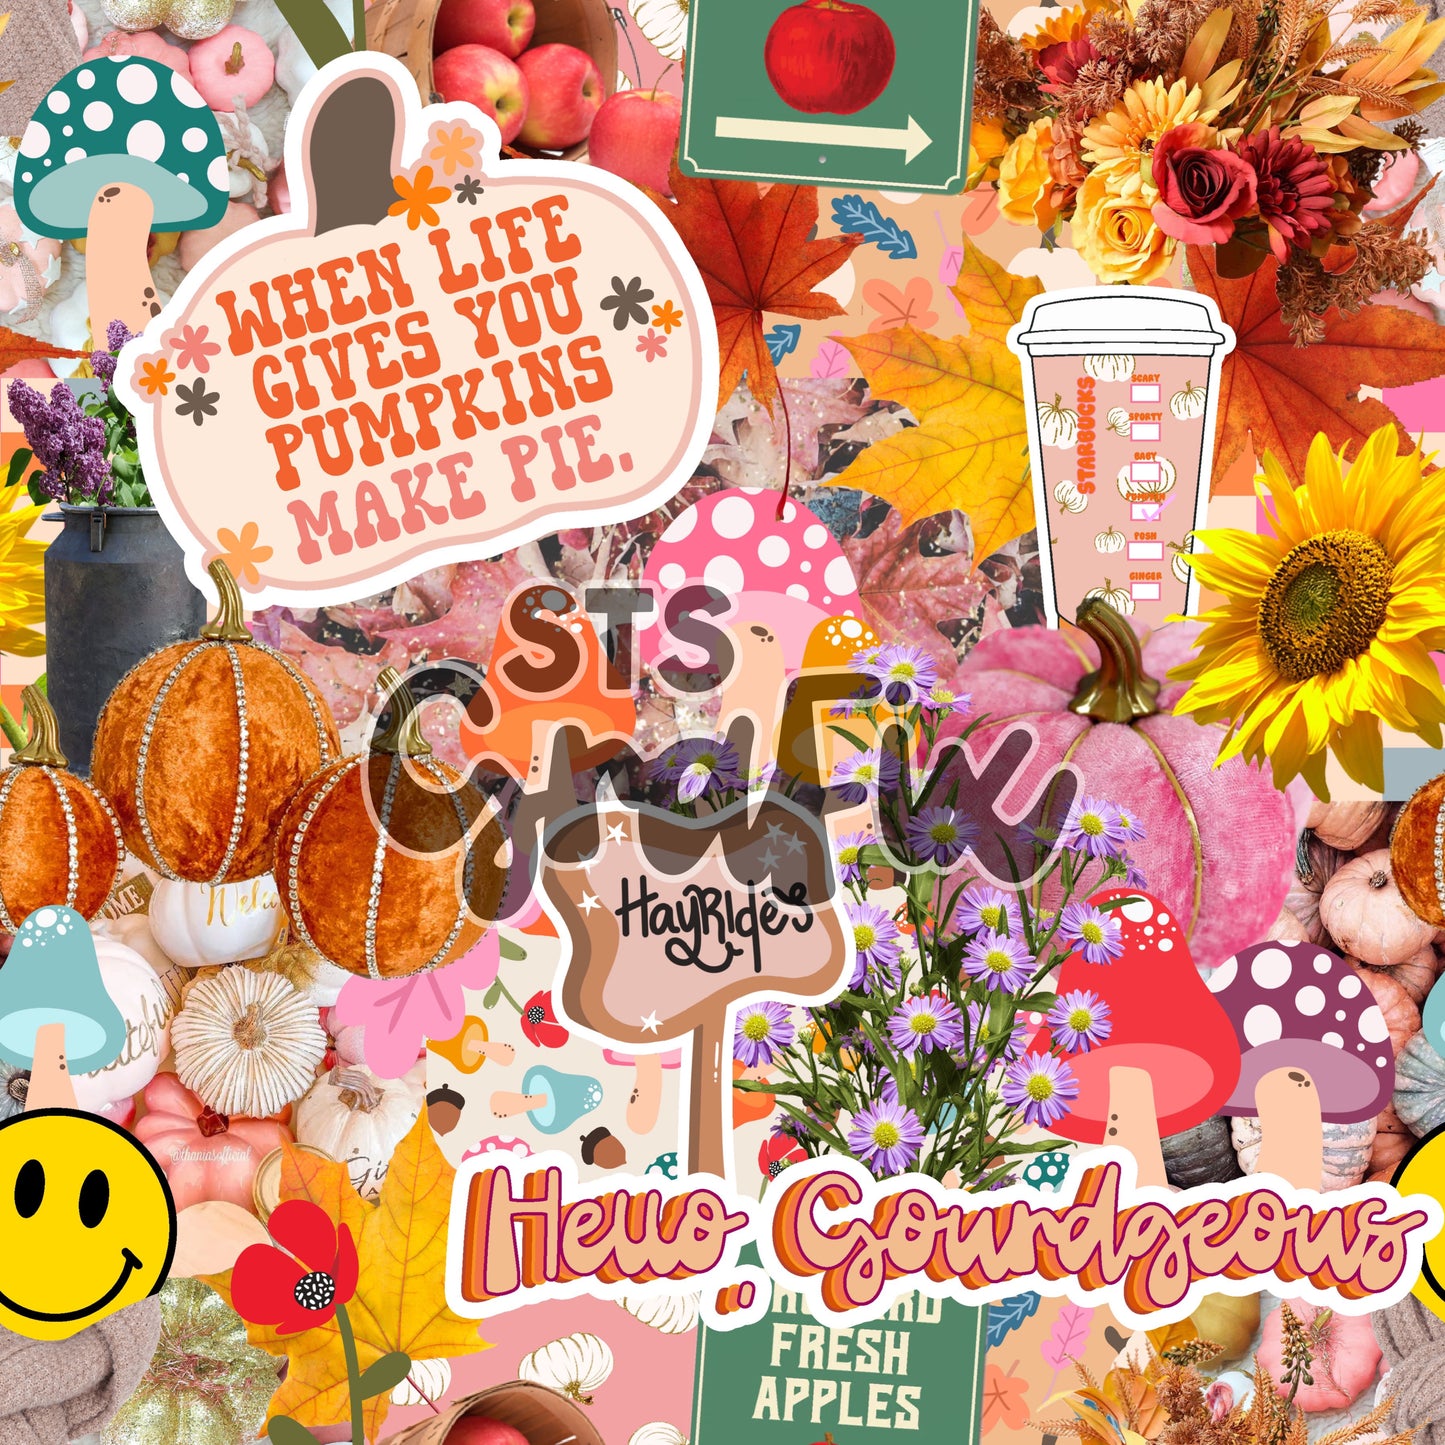 Bundle: When Life Gives You Pumpkins—BOTH COLLAGES